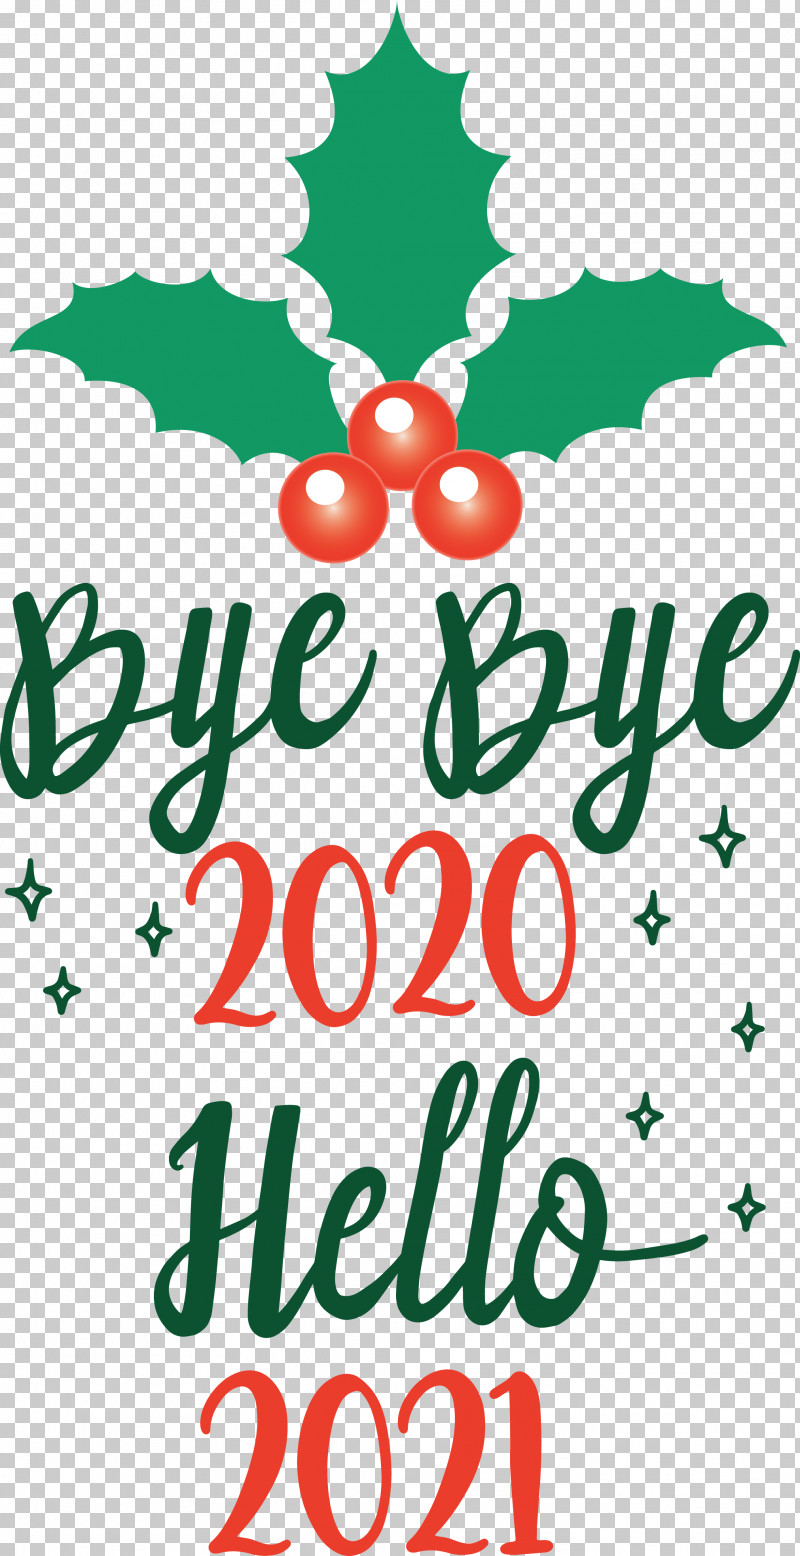 Hello 2021 Year Bye Bye 2020 Year PNG, Clipart, Abstract Art, Bye Bye 2020 Year, Christmas Day, Drawing, Hello 2021 Year Free PNG Download